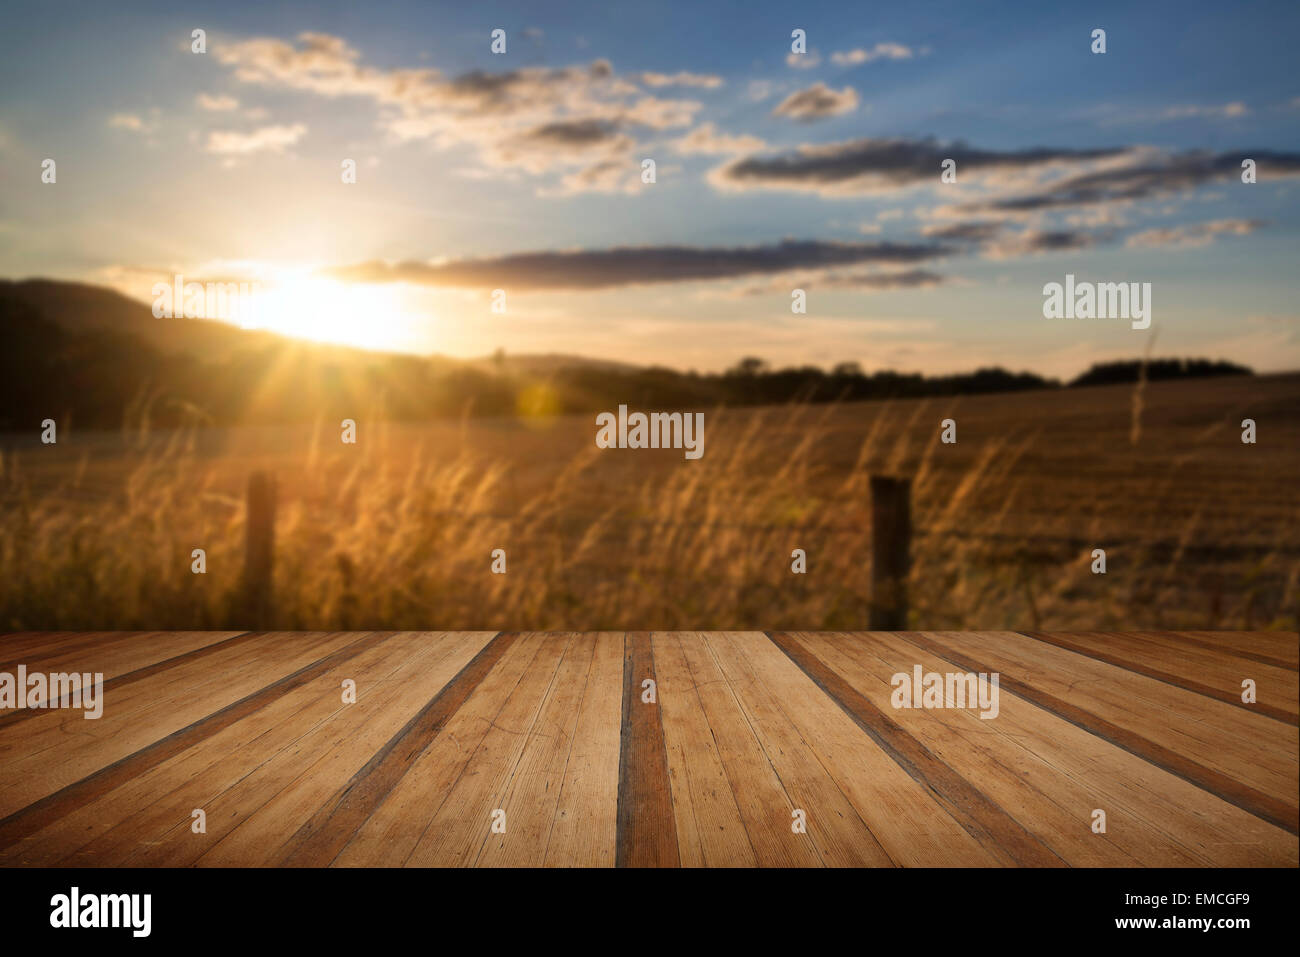 Beautiful Summer image of sun shining and backlighting countryside landscape with wooden planks floor Stock Photo